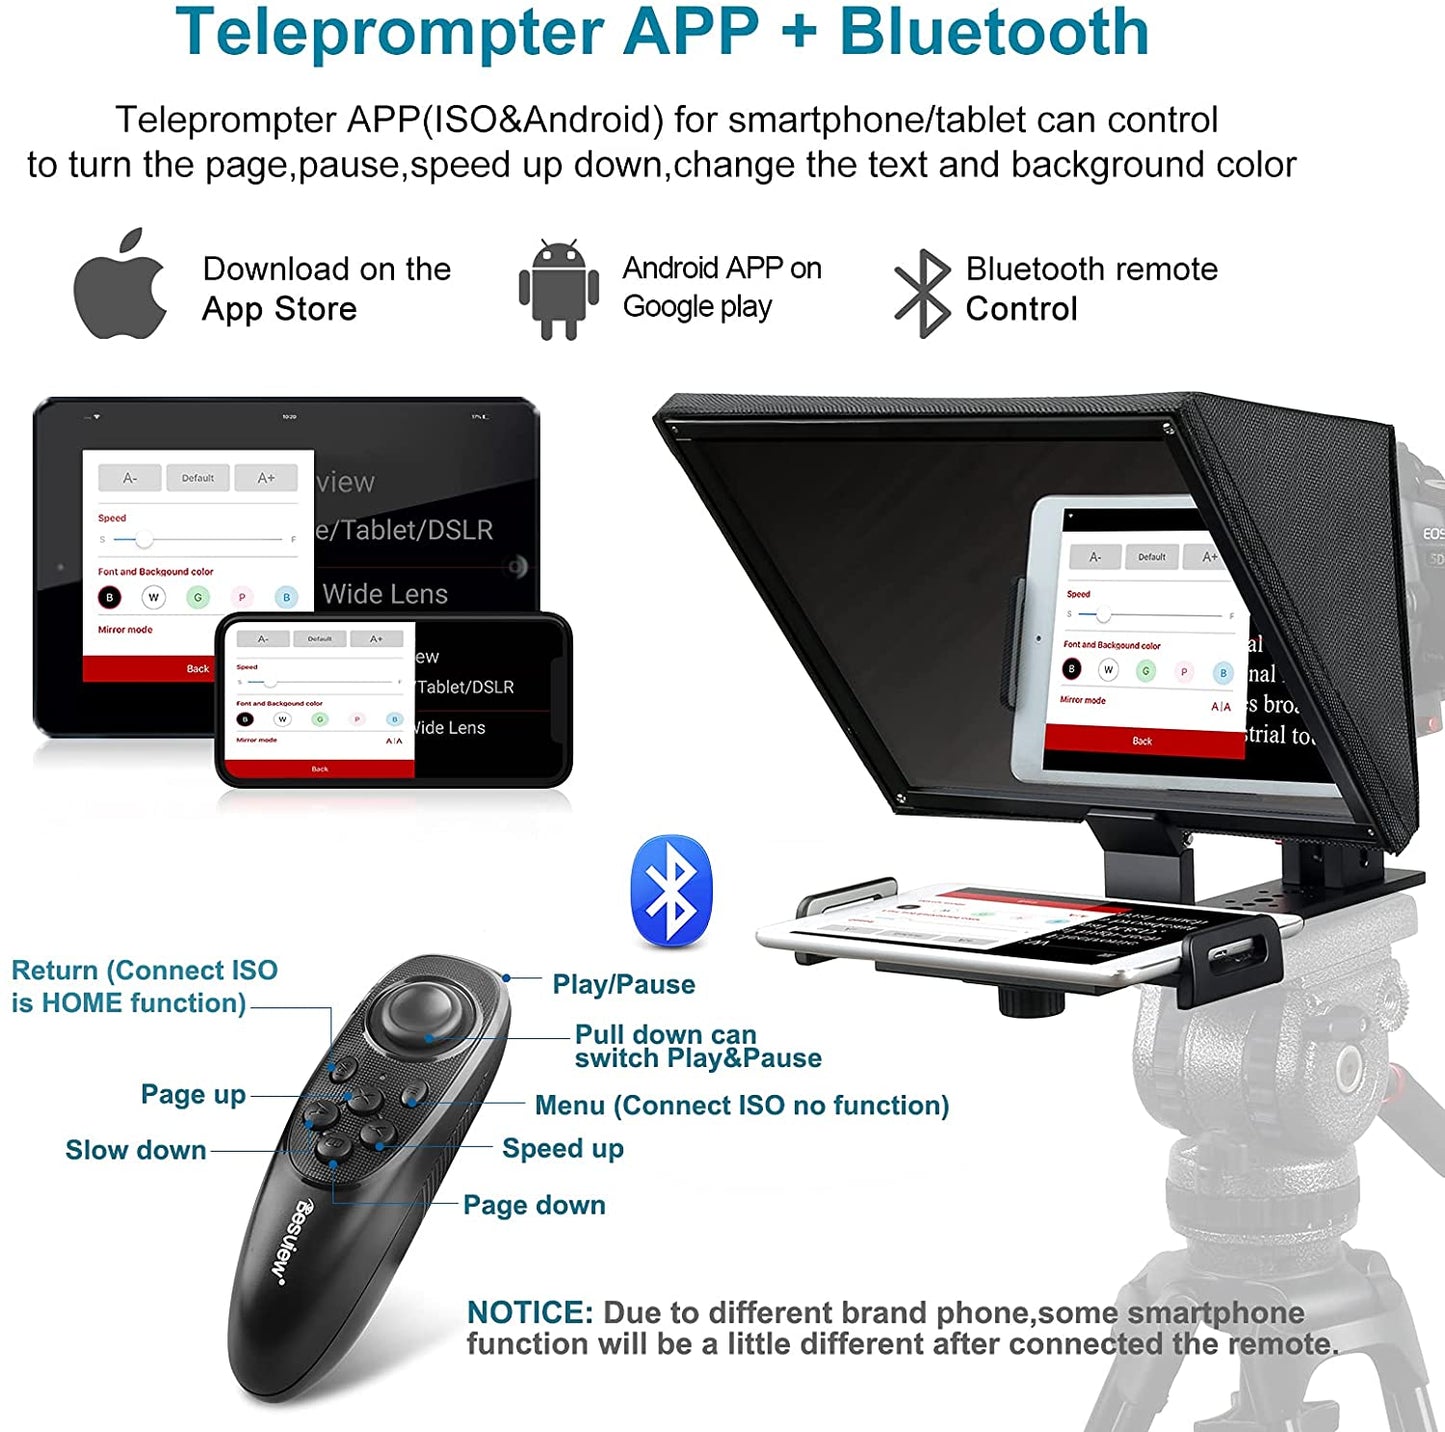 Desview / Bestview T12 12" Universal Teleprompter with Horizontal / Vertical Shooting, Bluetooth Remote Control, and Mobile App Support for Smartphone, Tablet, DSLR Camera Portable for Youtube Interview Studio